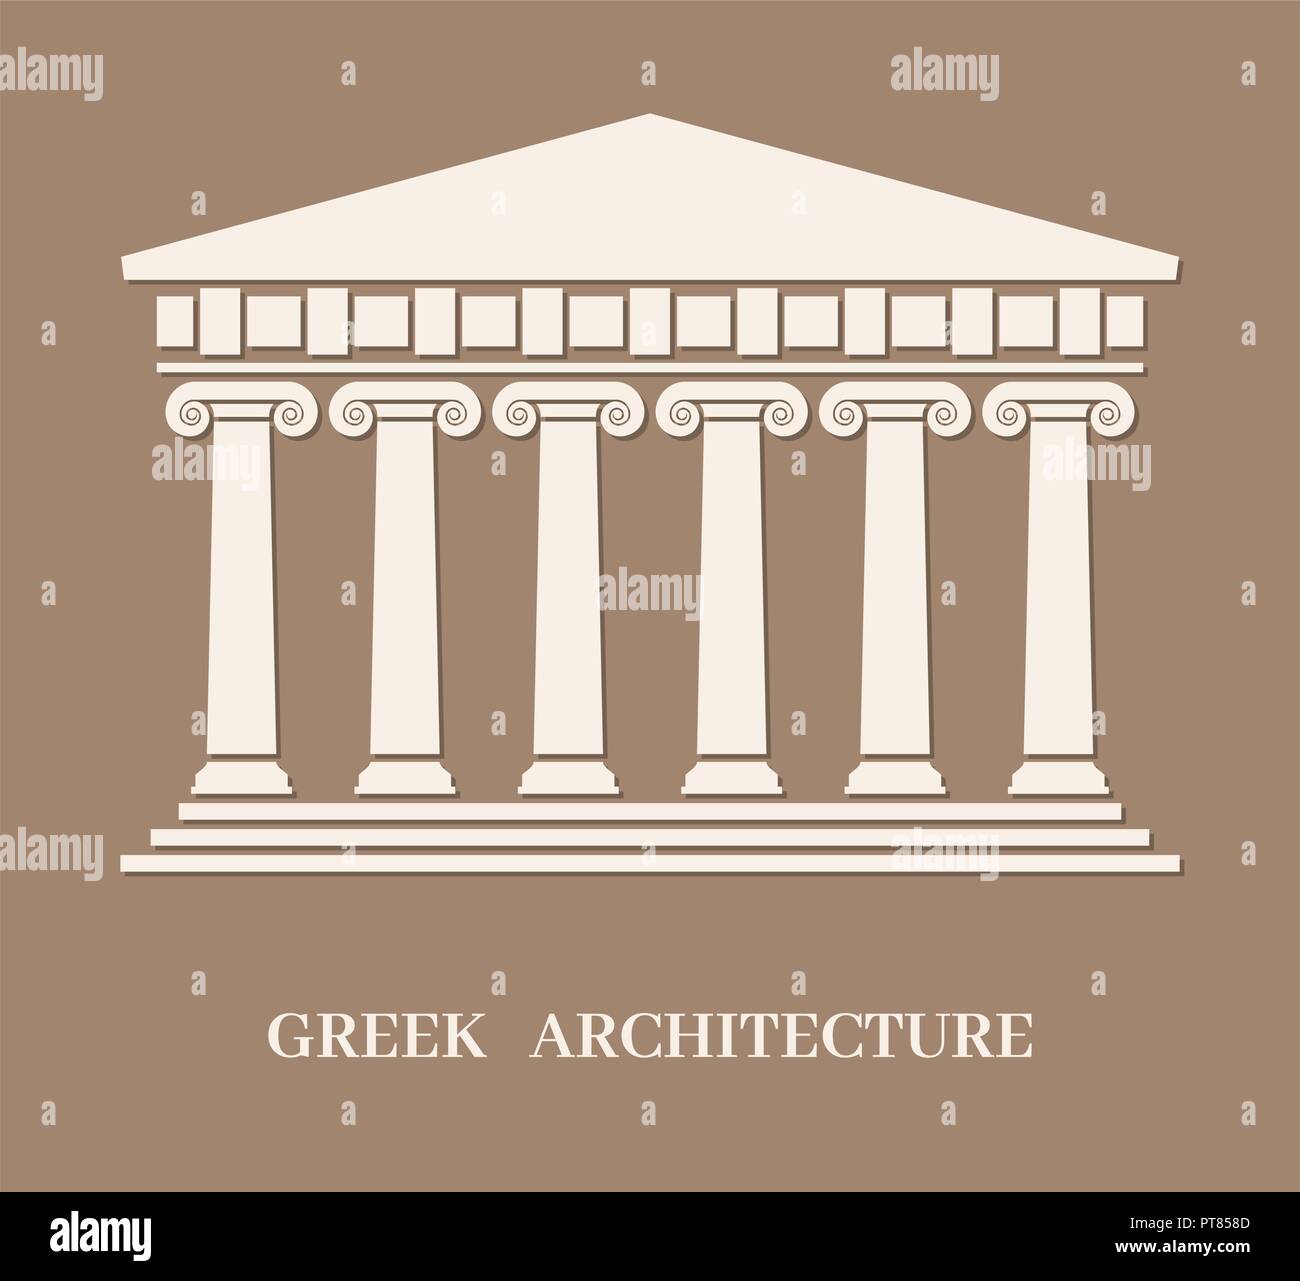 vector ancient greek architecture with columns. roman temple building with pillars. logo of greek parthenon or acropolis with greek architecture text Stock Vector